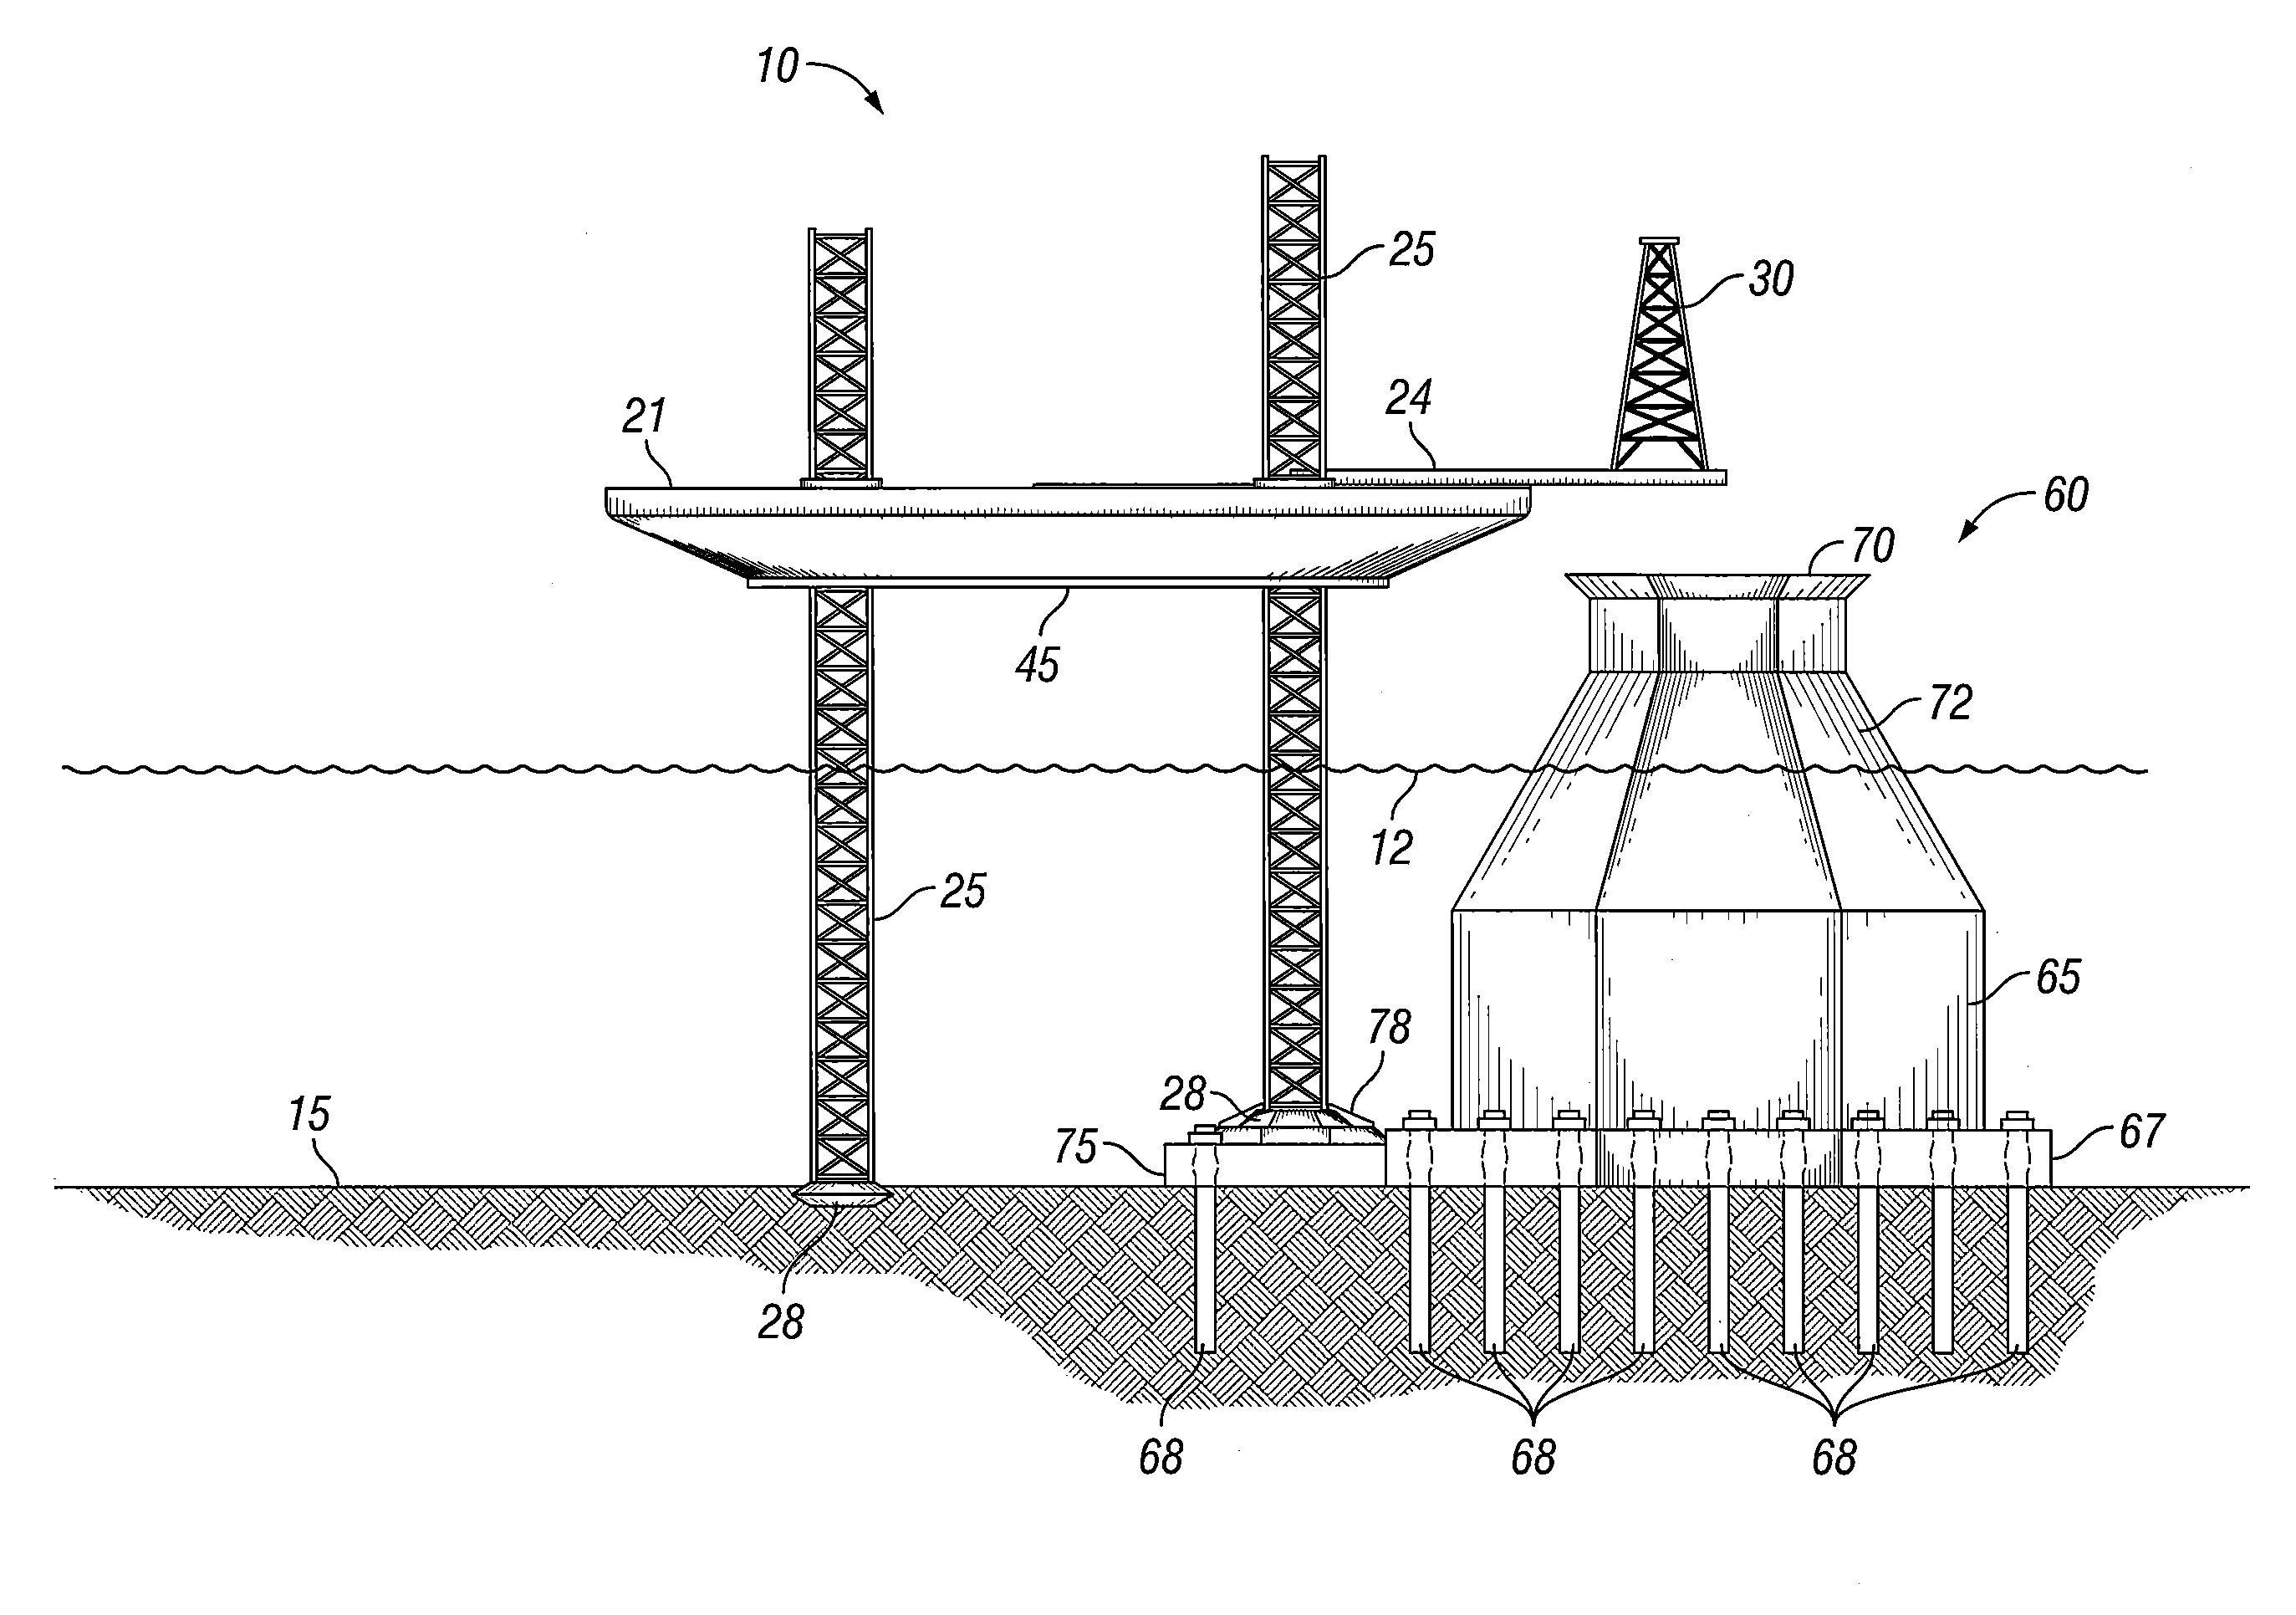 Ice worthy jack-up drilling unit with conical piled monopod and sockets